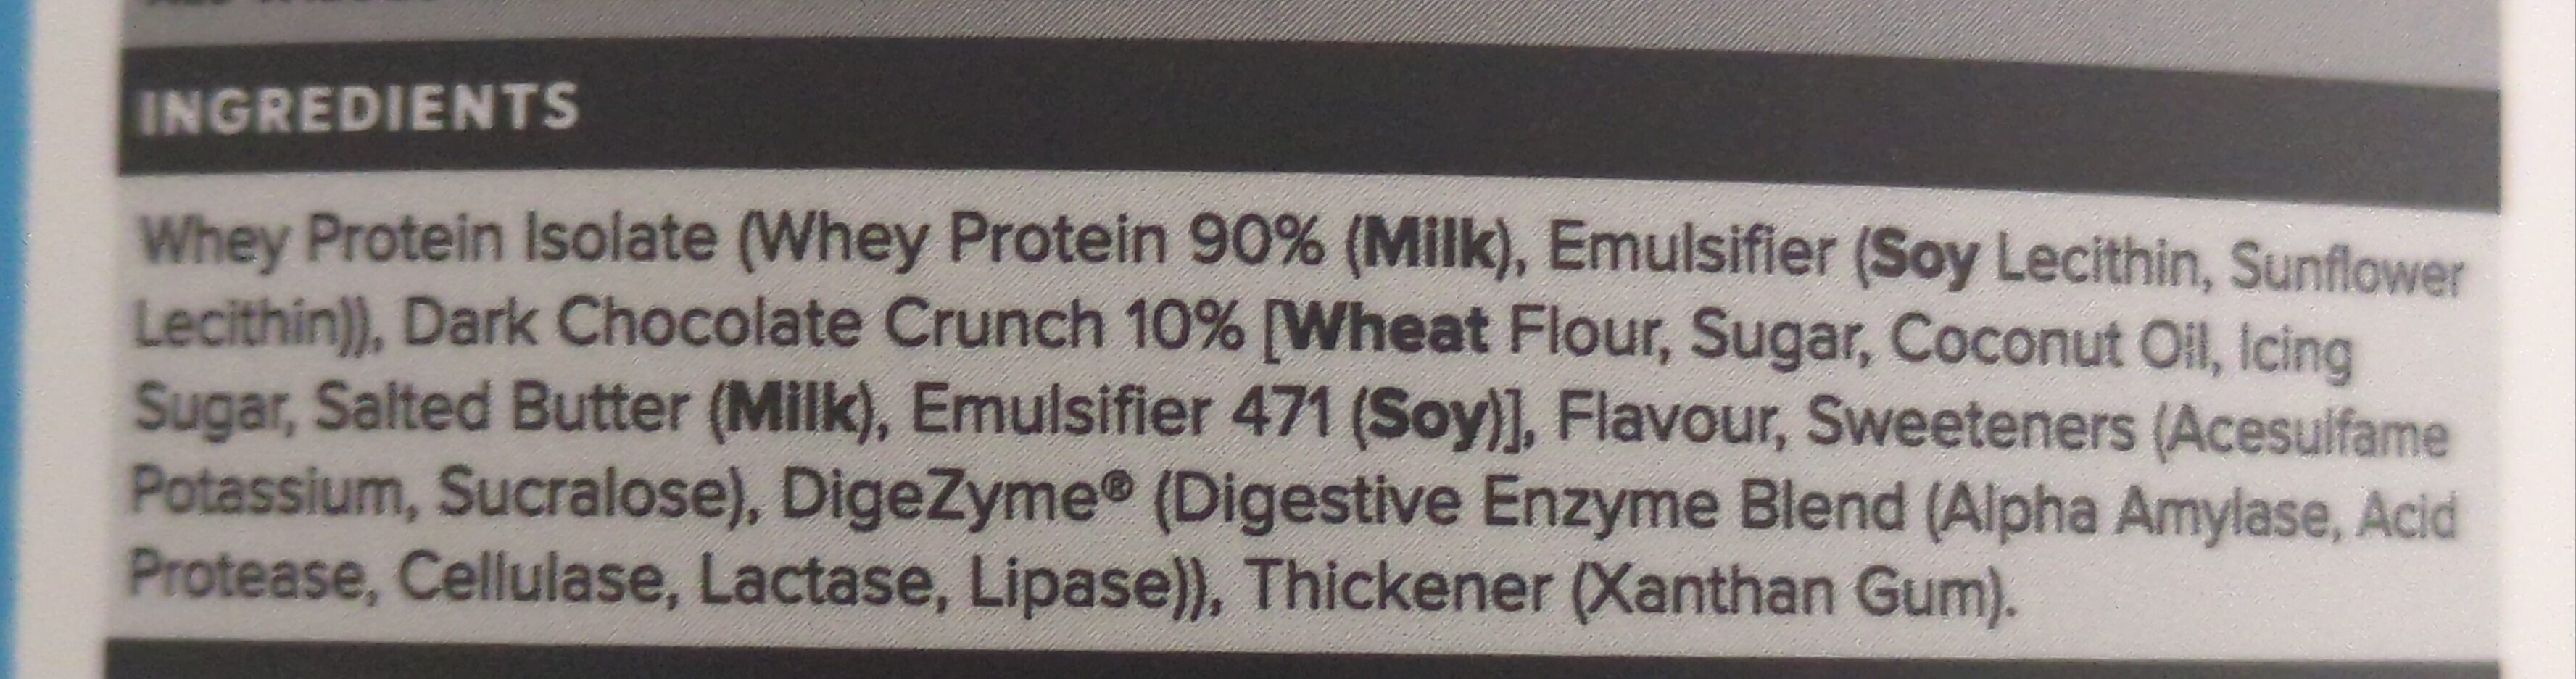 Protein - Cookies and Cream - Ingredients